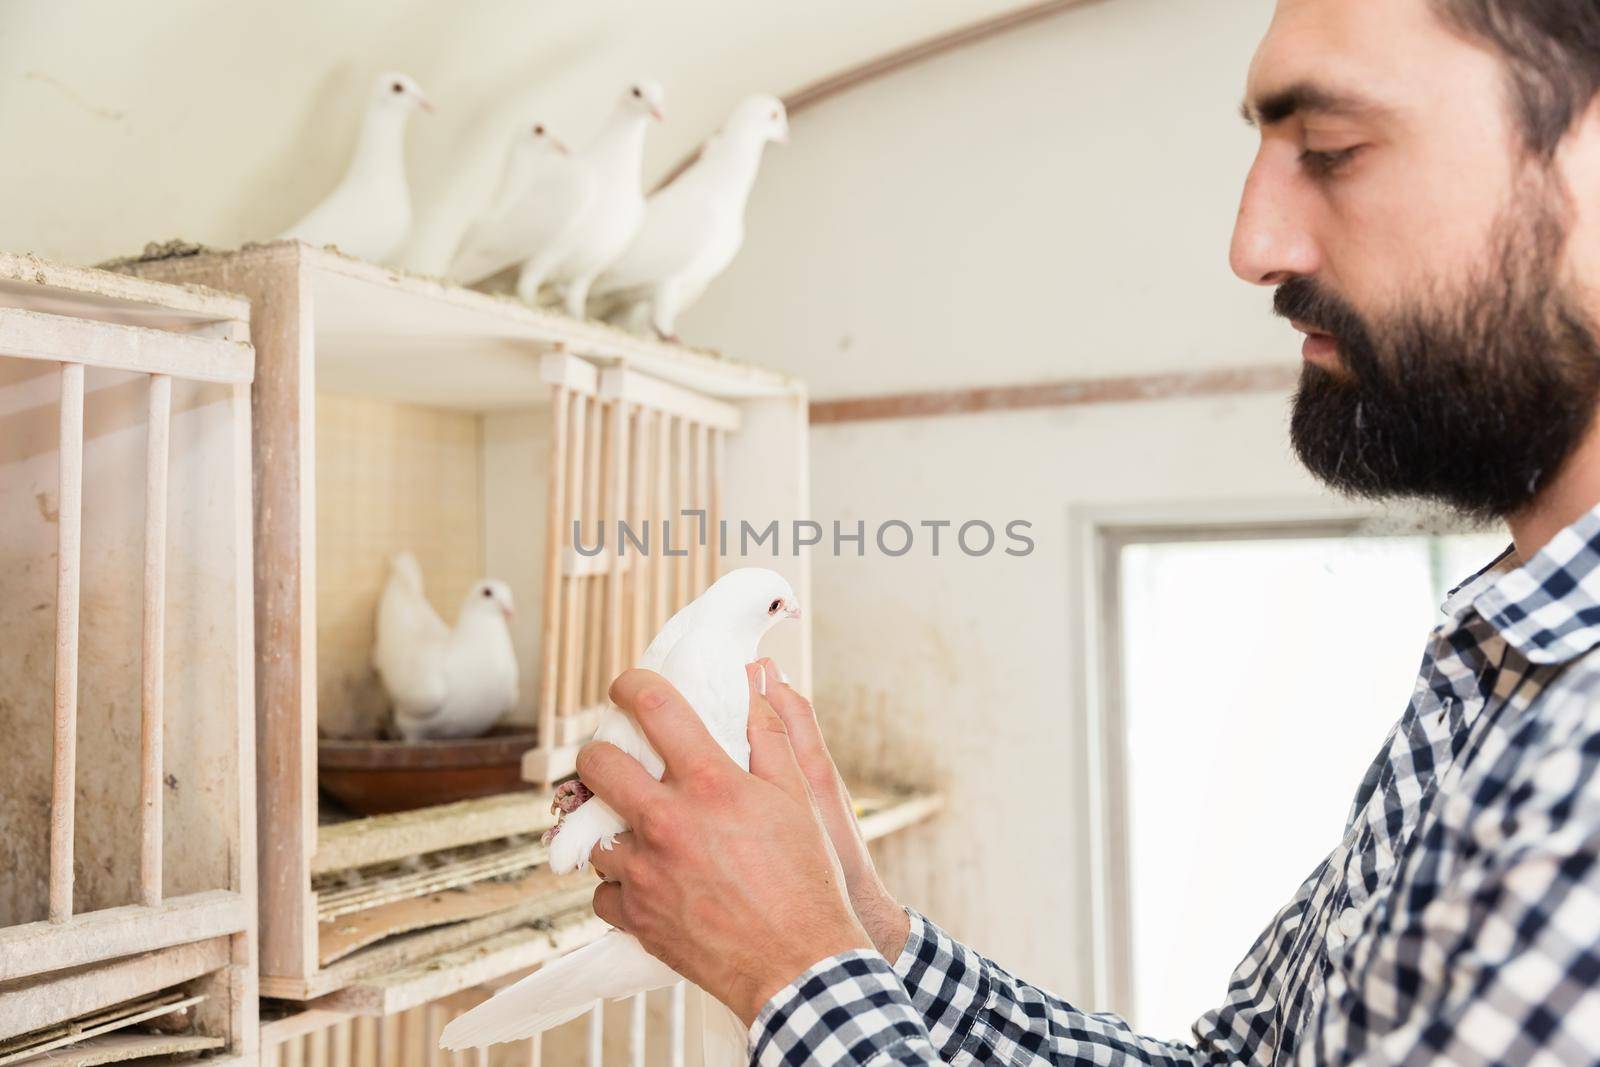 A man holding a pigeon in a pigeon loft on his hand